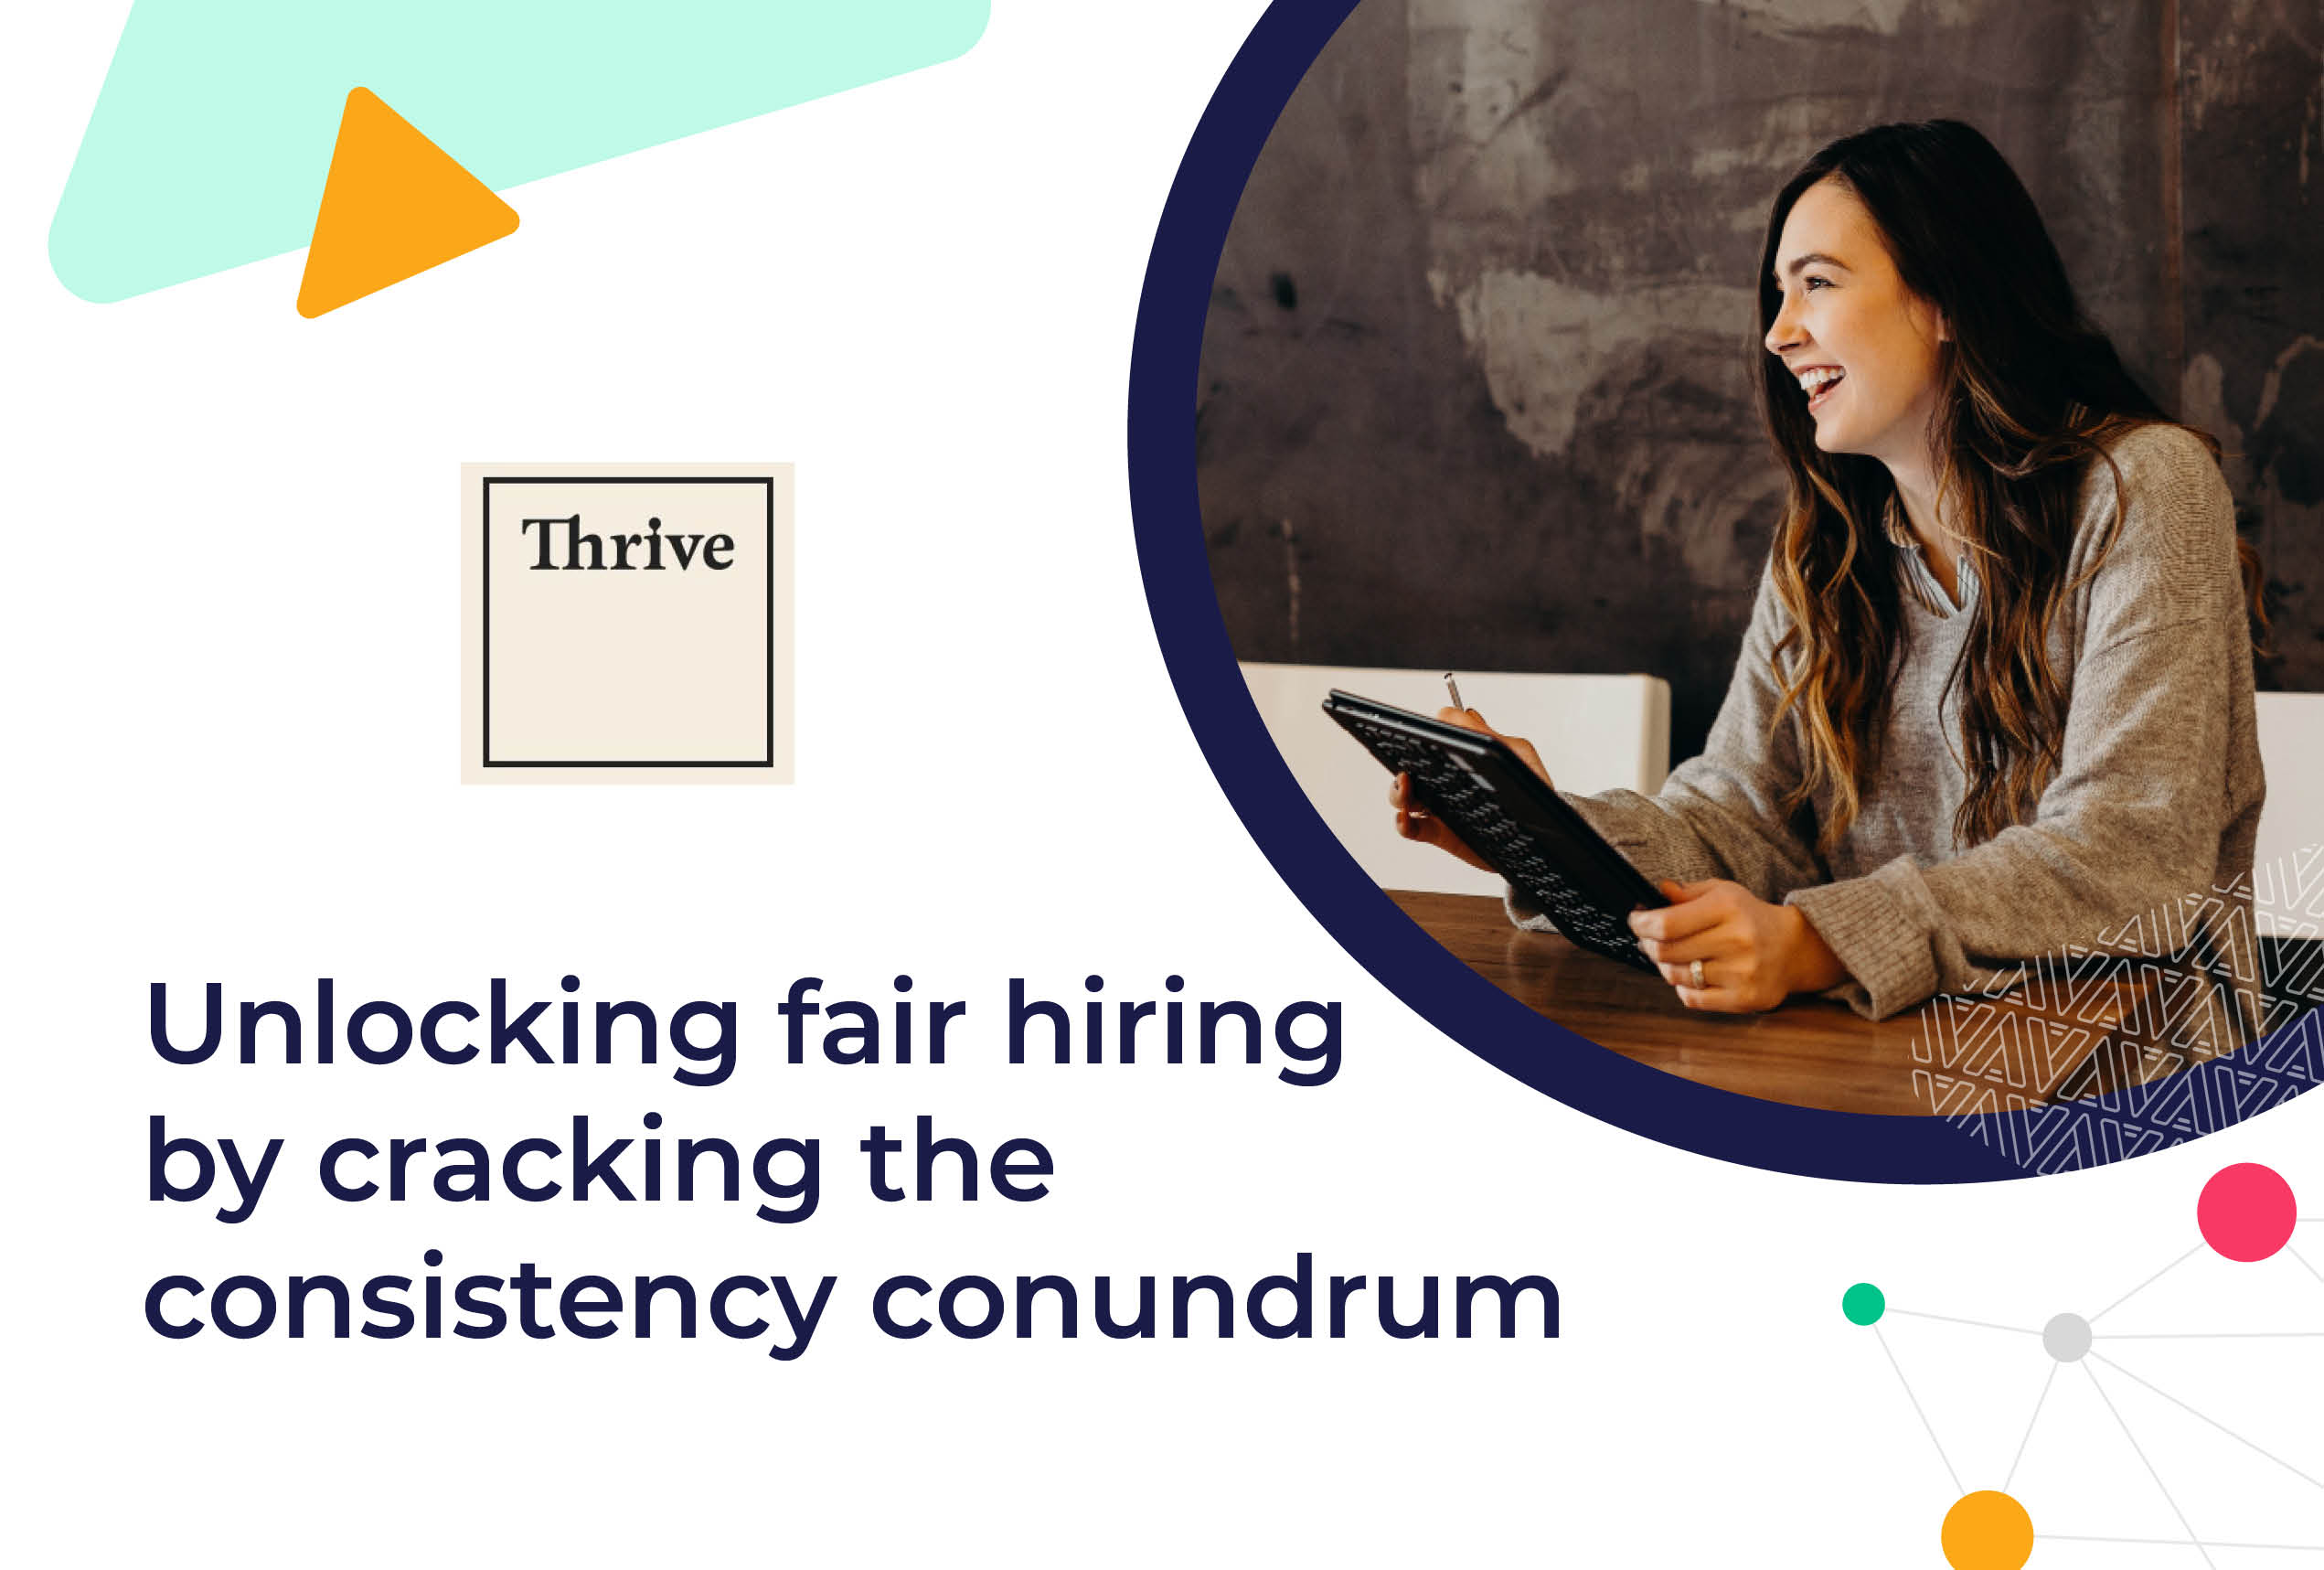 Thrive: Unlocking fair hiring by cracking the consistency conundrum